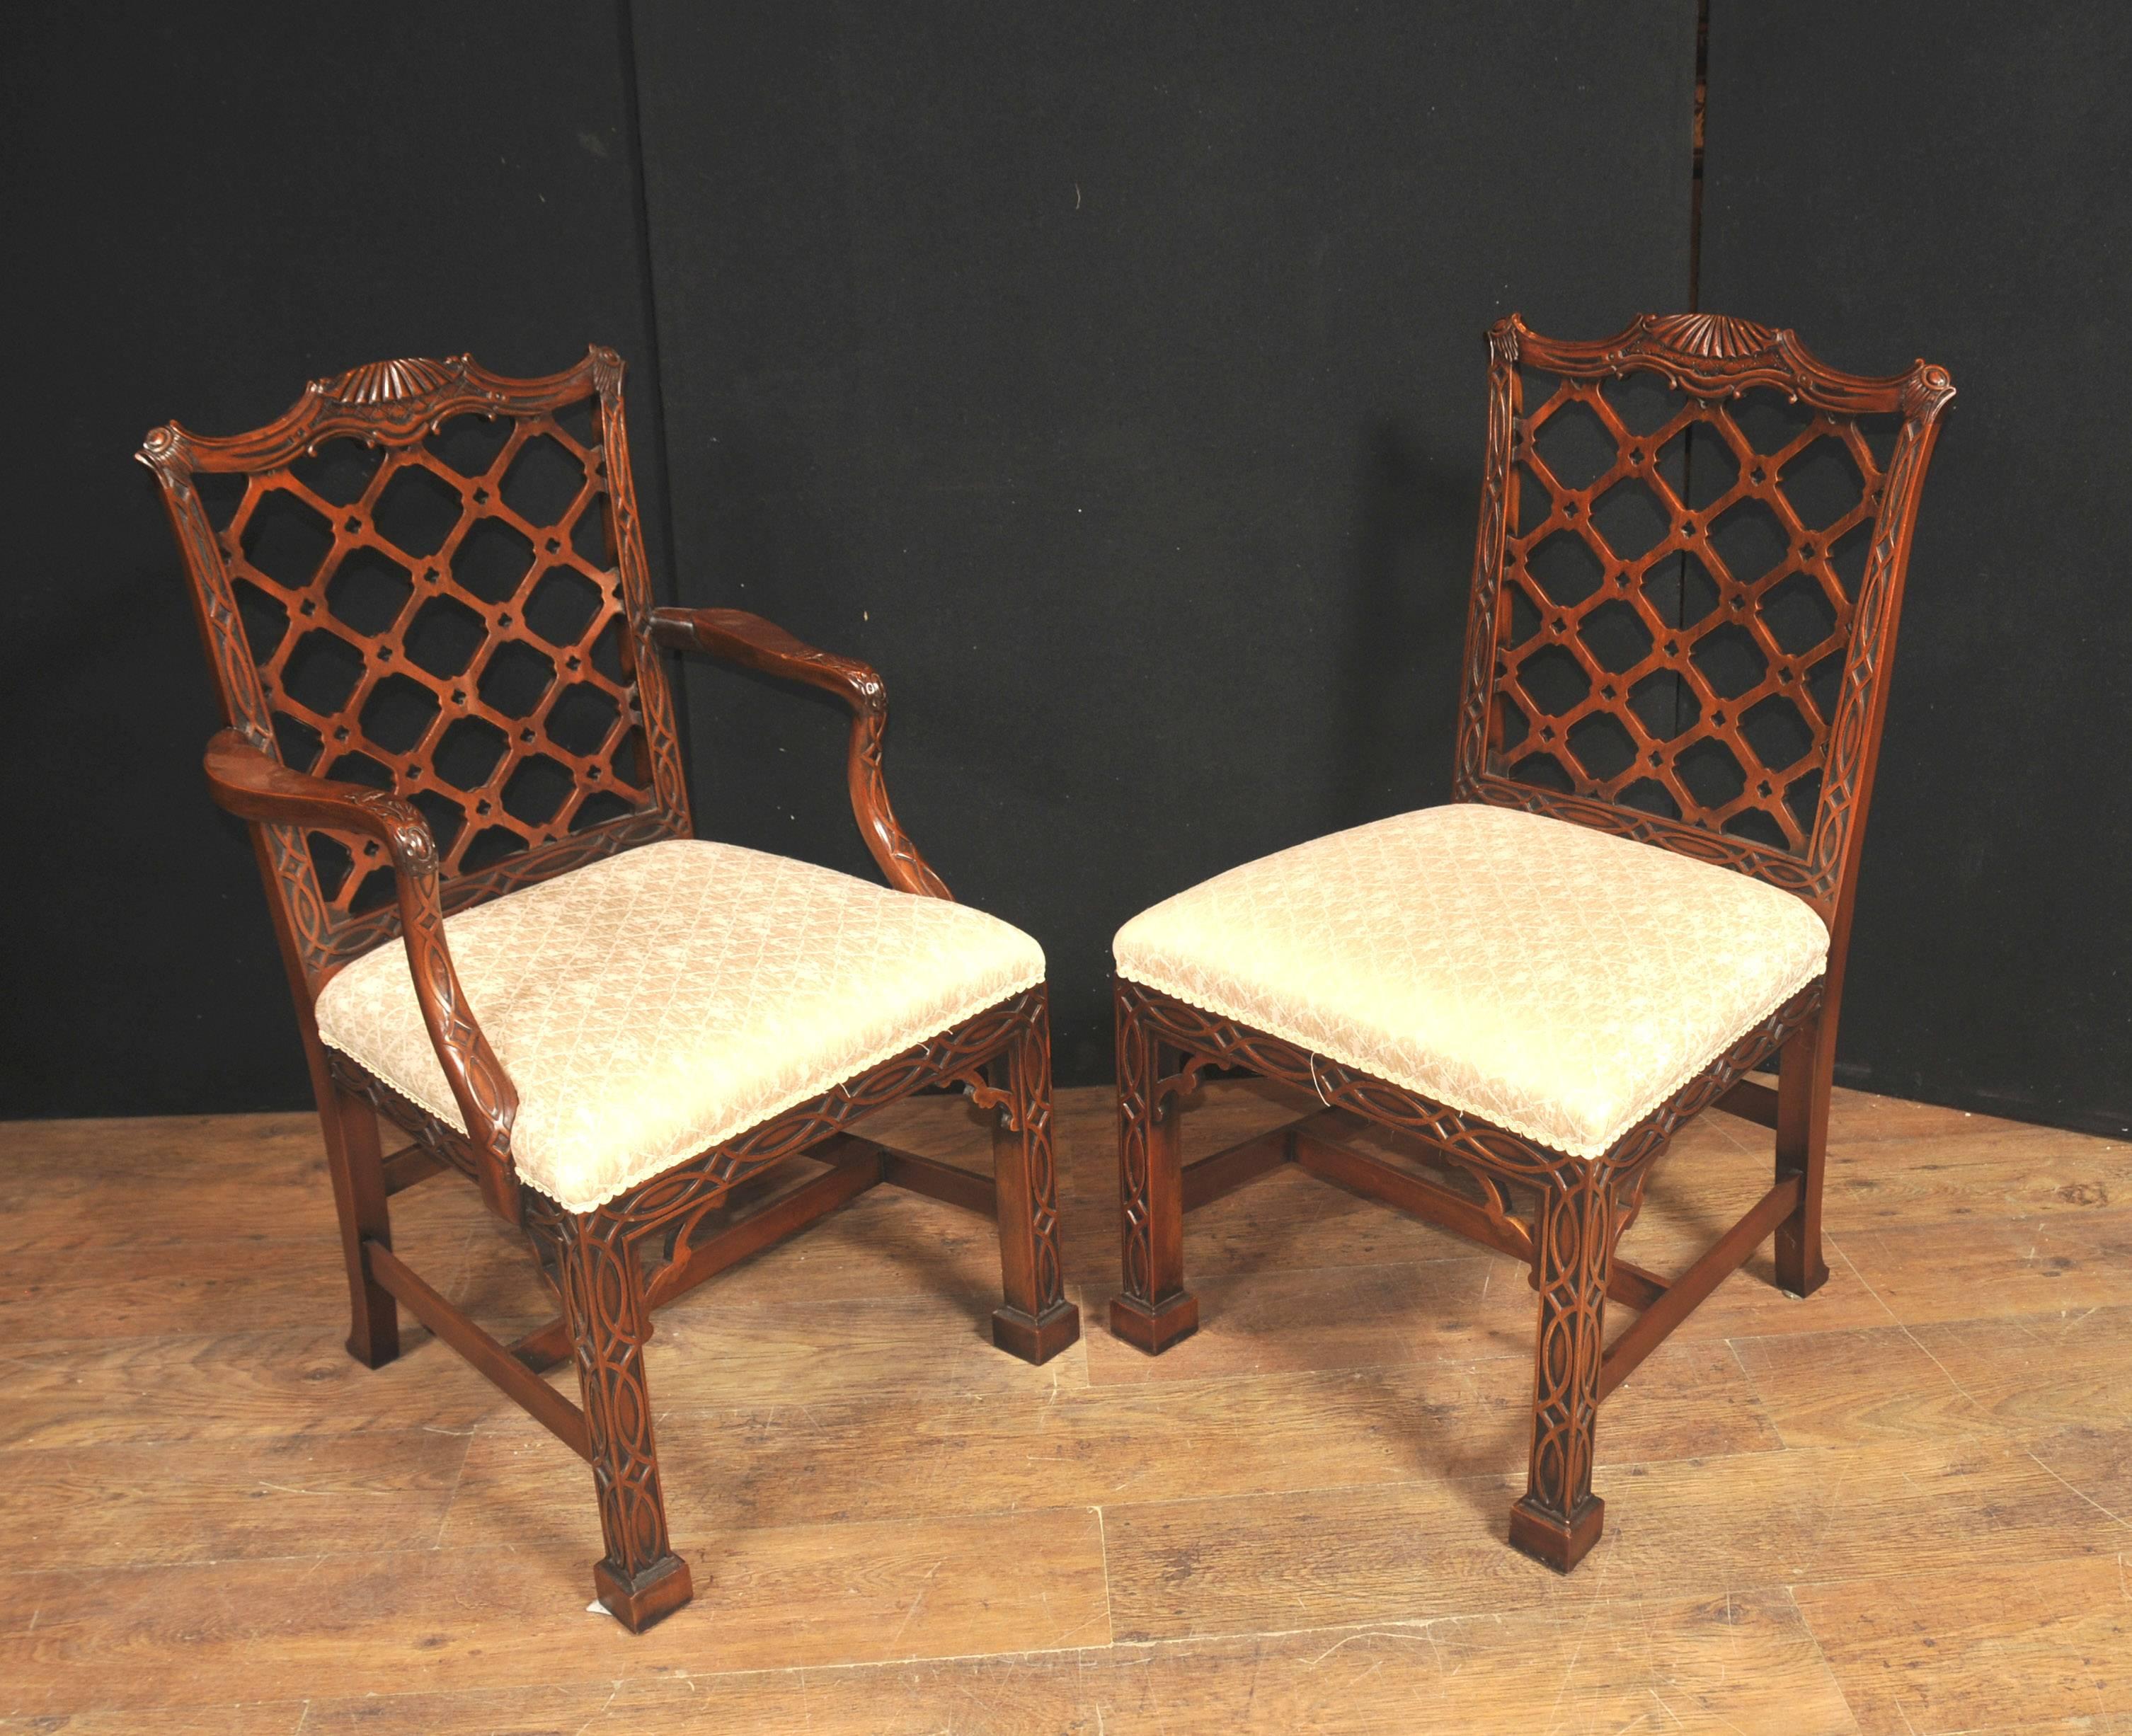 Come and view this set for yourself in our Hertfordshire showroom, 25 mins north of London.
Stunning set of English Chinese Chippendale style dining chairs in mahogany.
These are the Classic Gothic Chippendale look - solid and chunky, very